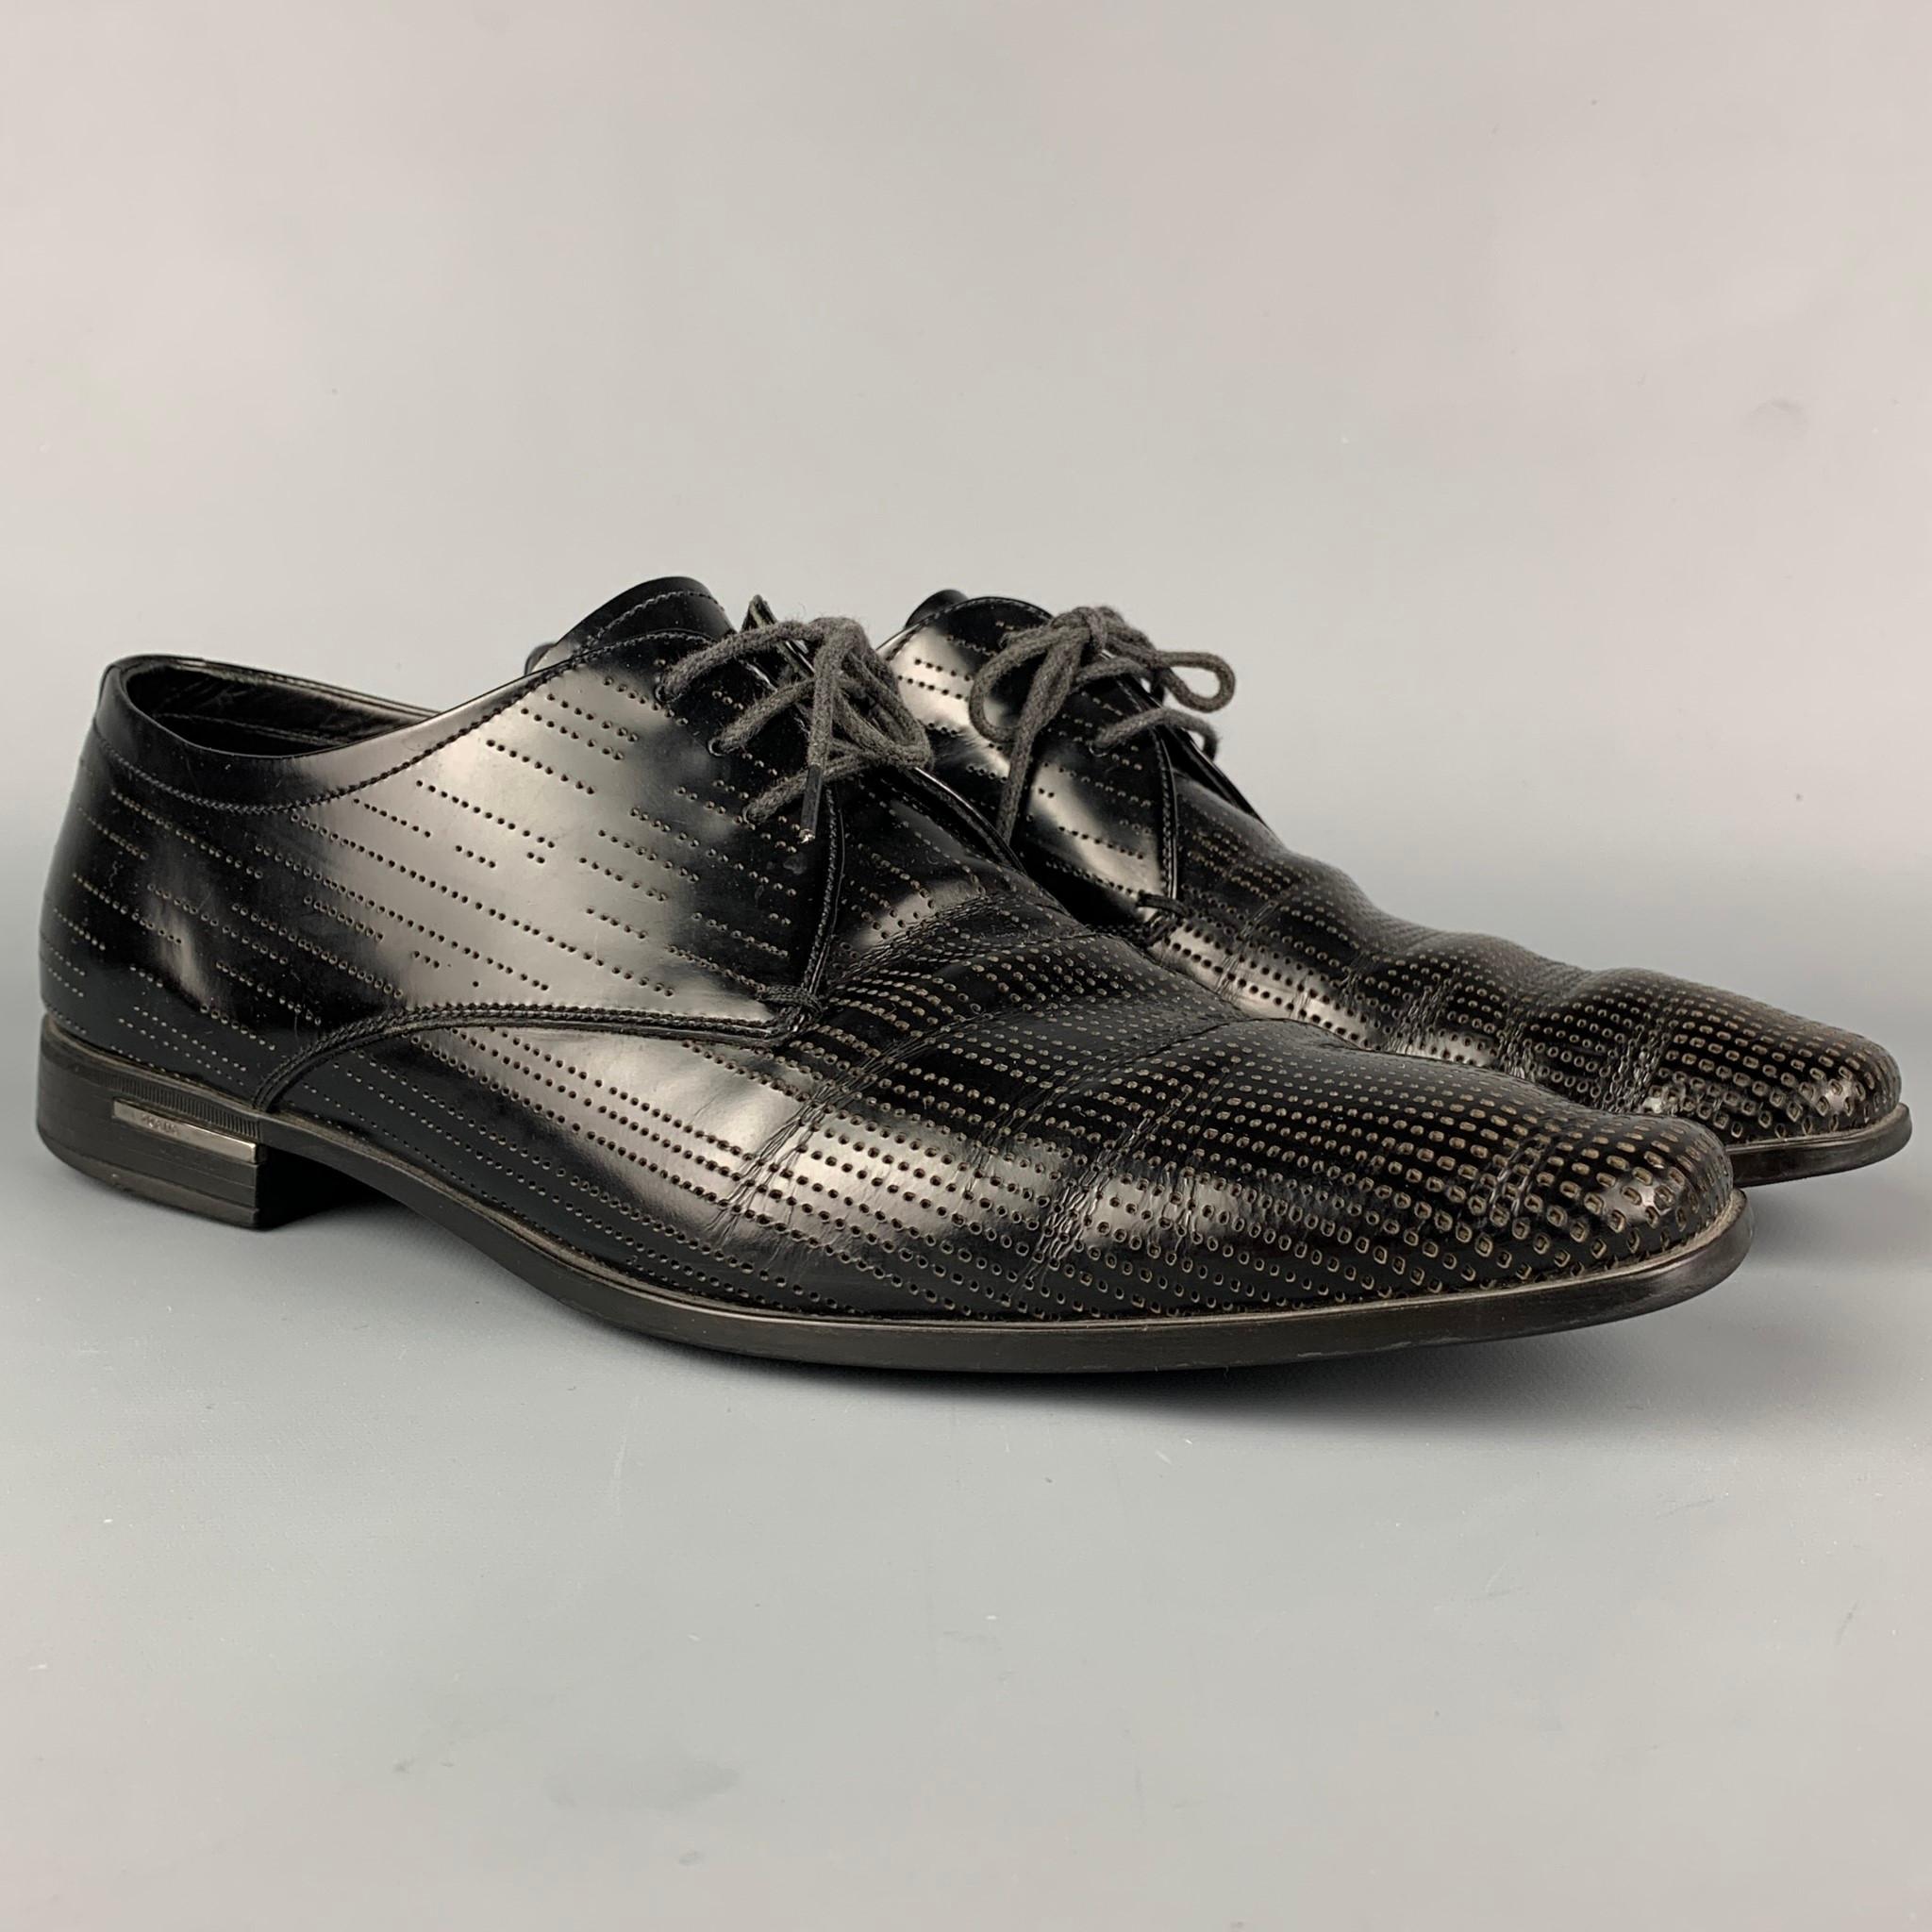 PRADA shoes comes in a black perforated leather featuring a square toe and a lace up closure. Made in Italy. 

Good Pre-Owned Condition. Light wear.
Marked: 2EE 044 8

Outsole: 12 in. x 4 in. 